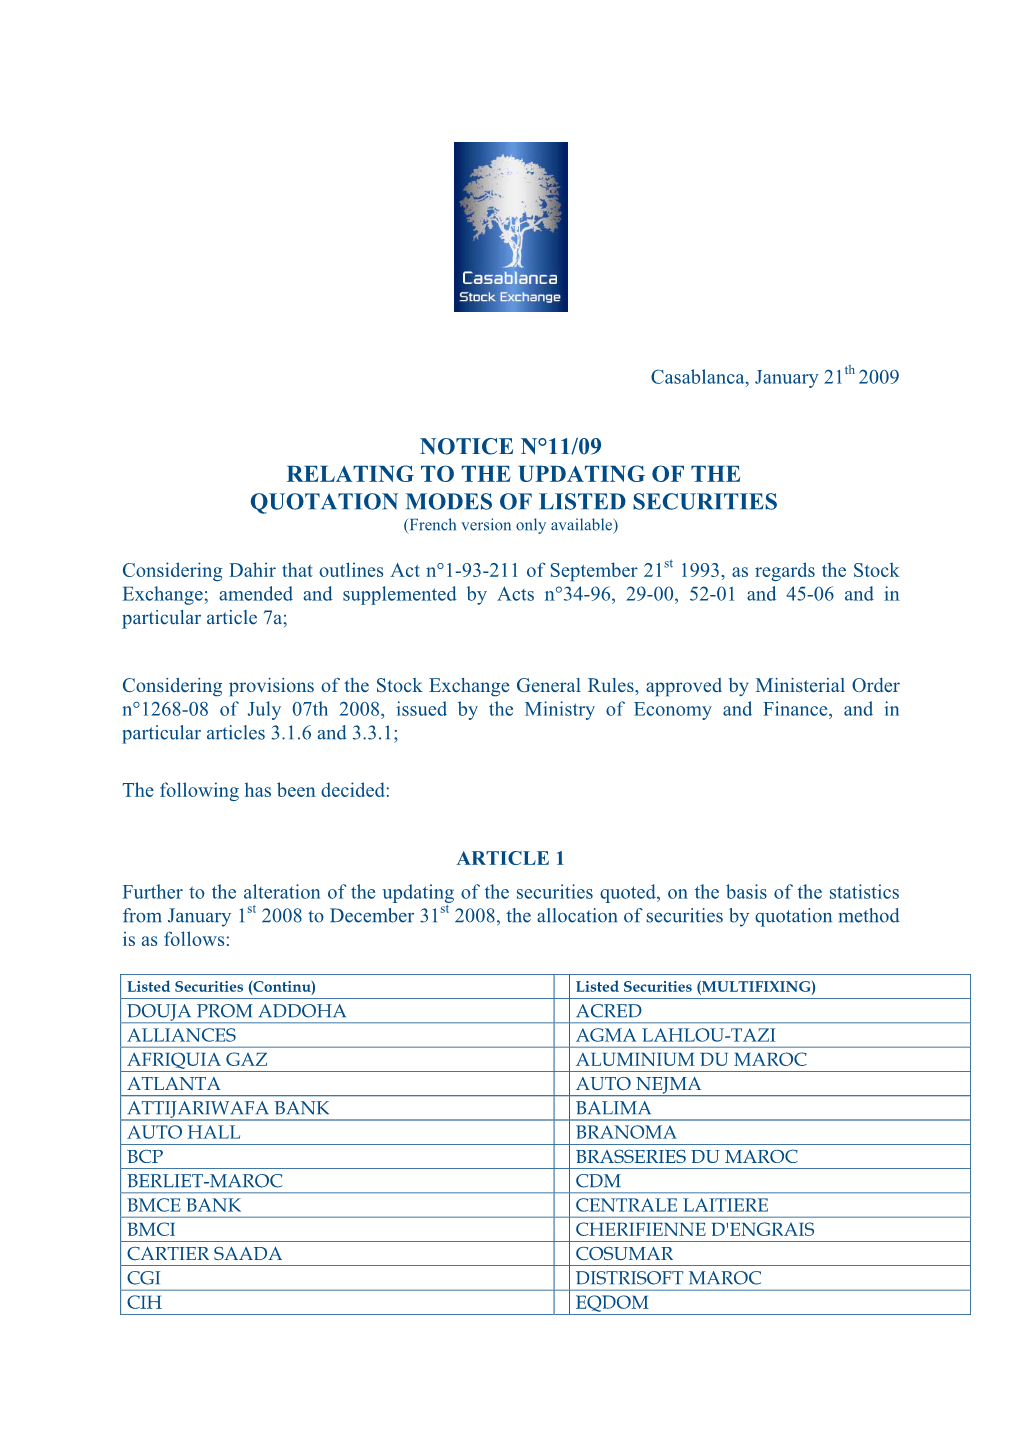 NOTICE N°11/09 RELATING to the UPDATING of the QUOTATION MODES of LISTED SECURITIES (French Version Only Available)